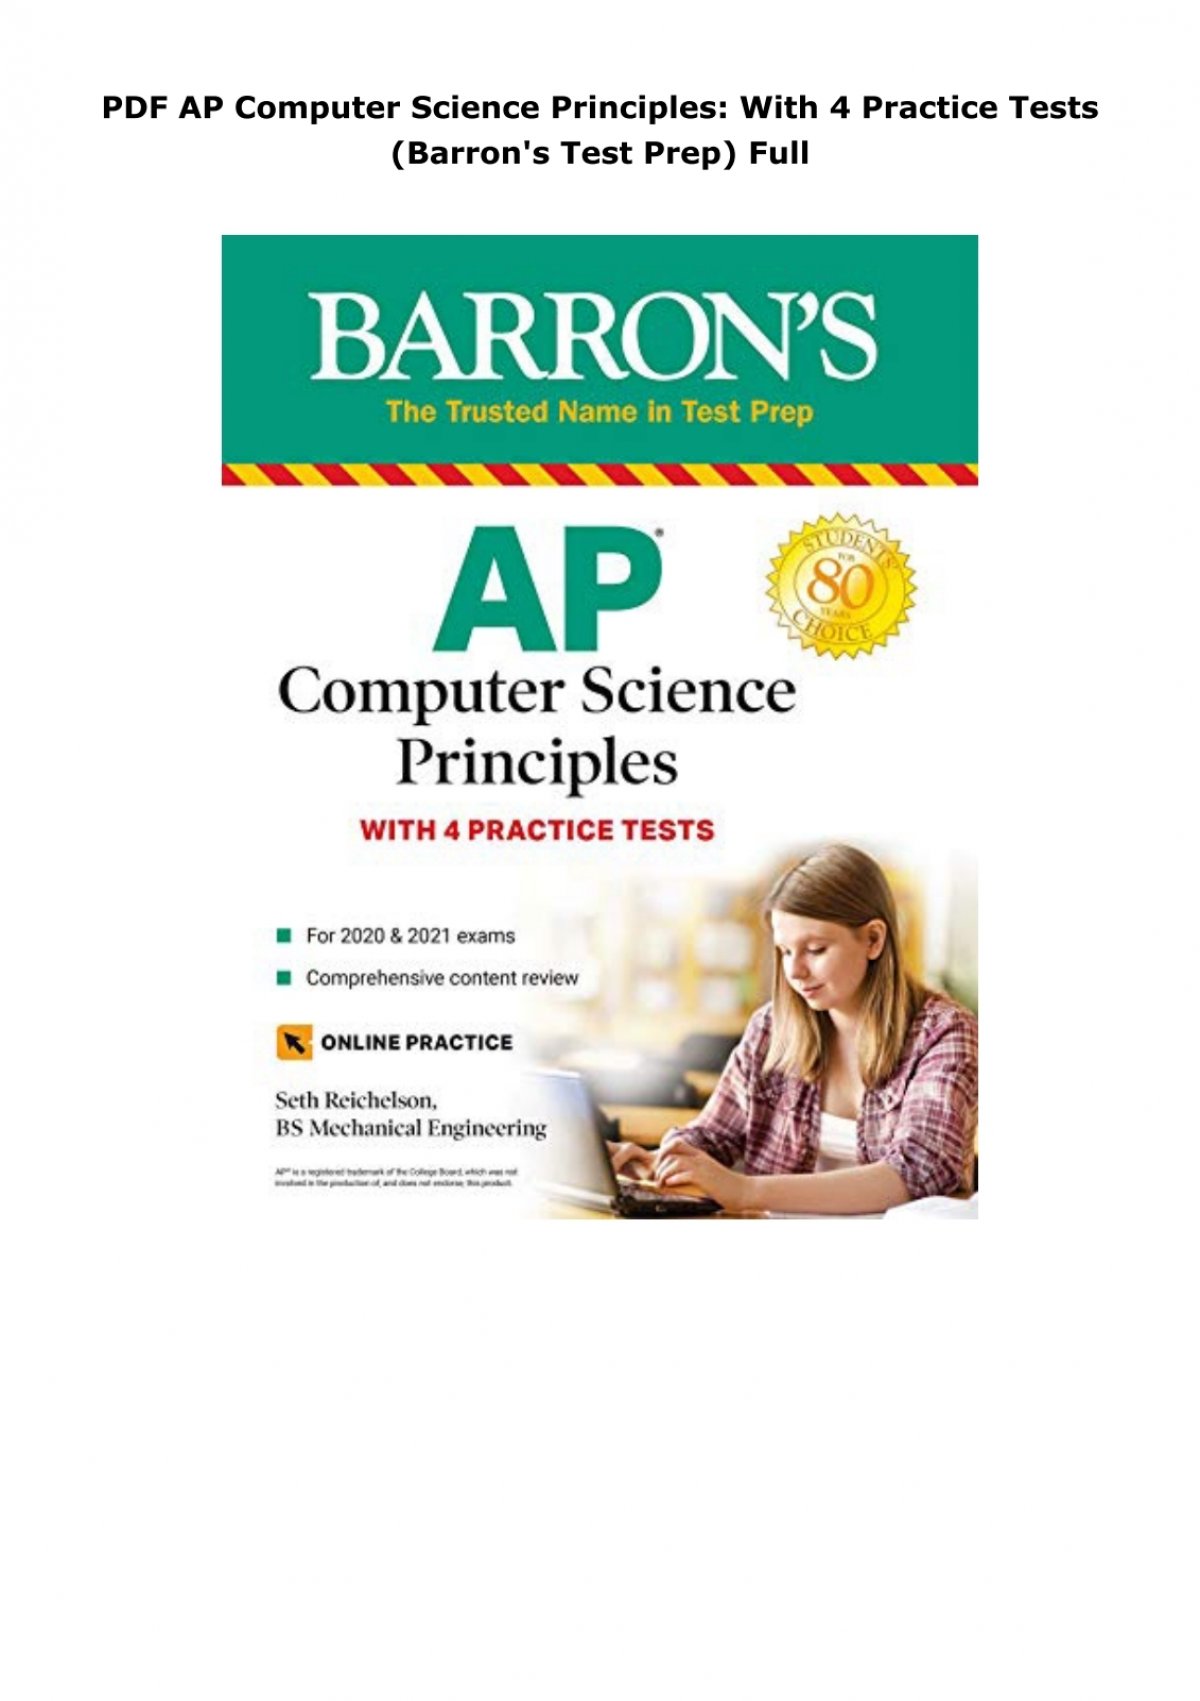 PDF AP Computer Science Principles: With 4 Practice Tests 